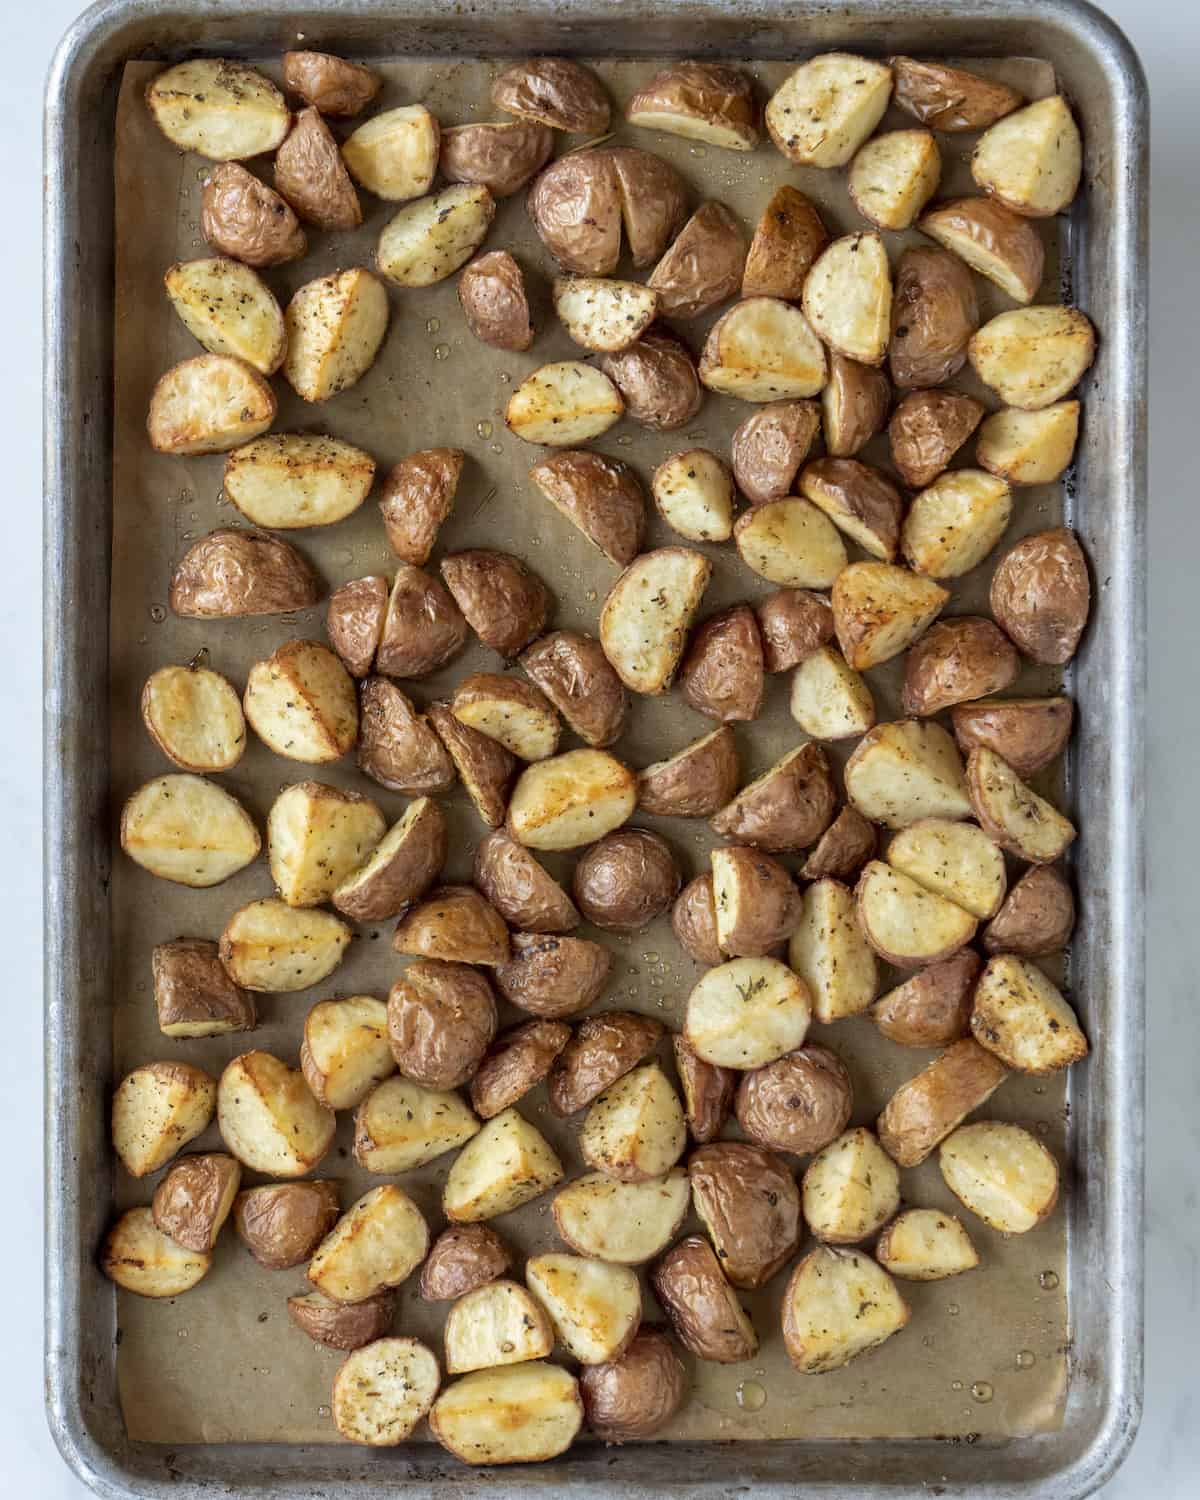 Quartered potatoes that have been cooked sitting on a baking sheet with parchment paper.  